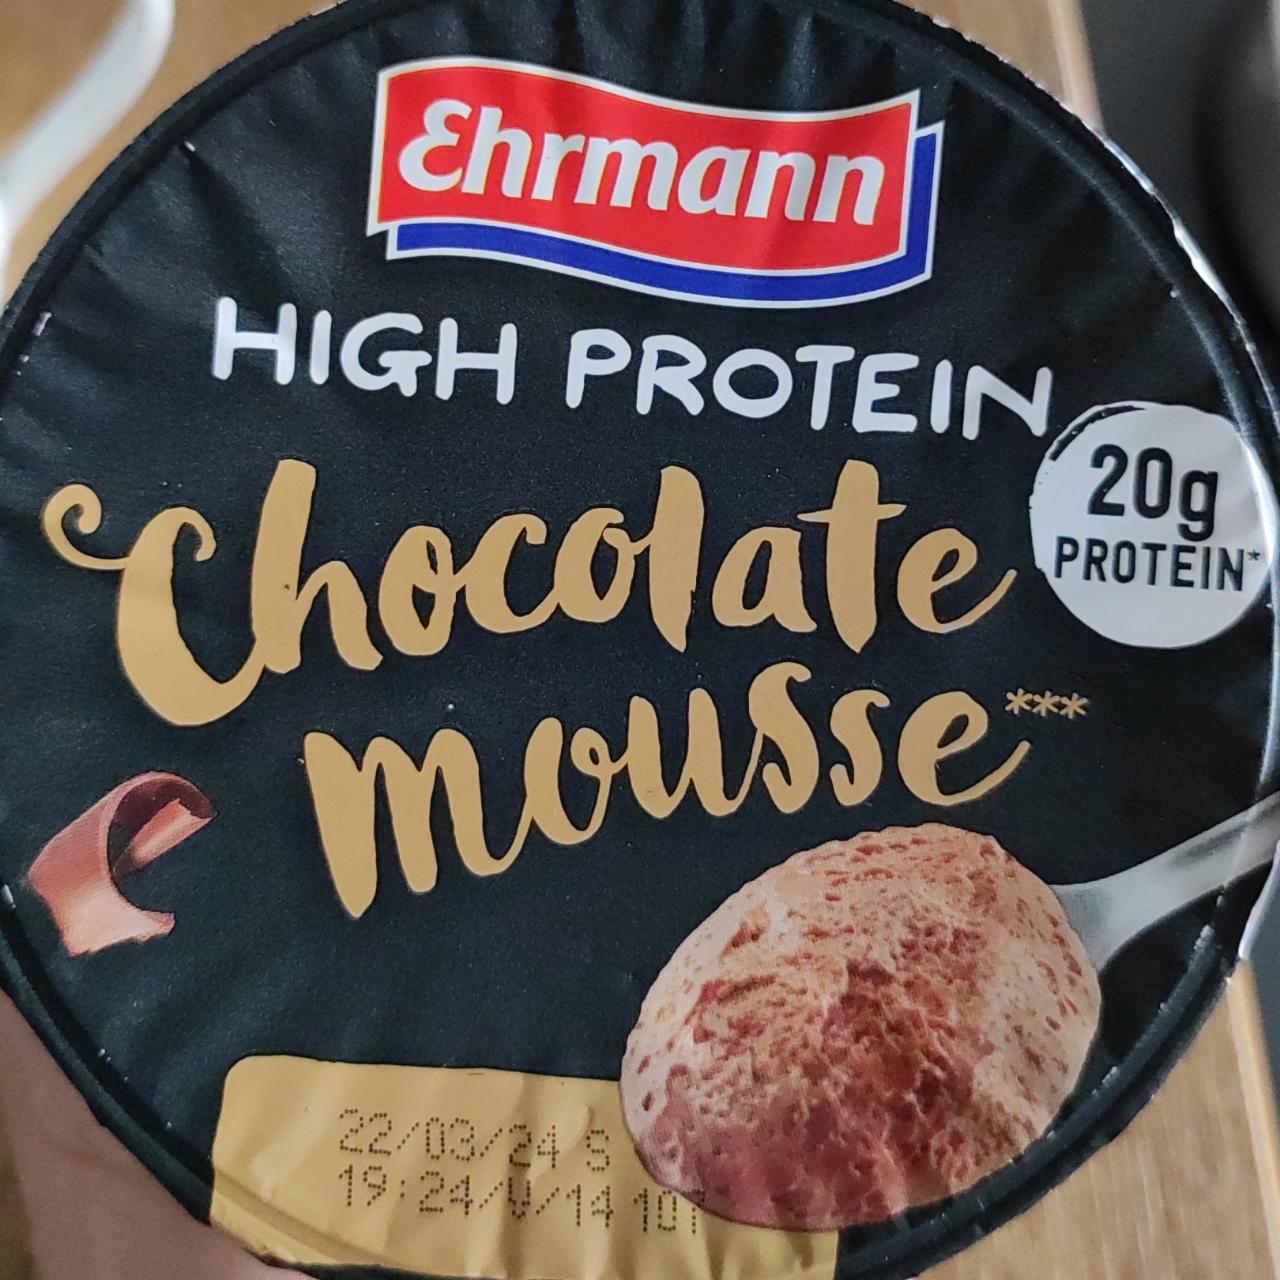 Фото - Hight protein chocolate mousse Ehrmann